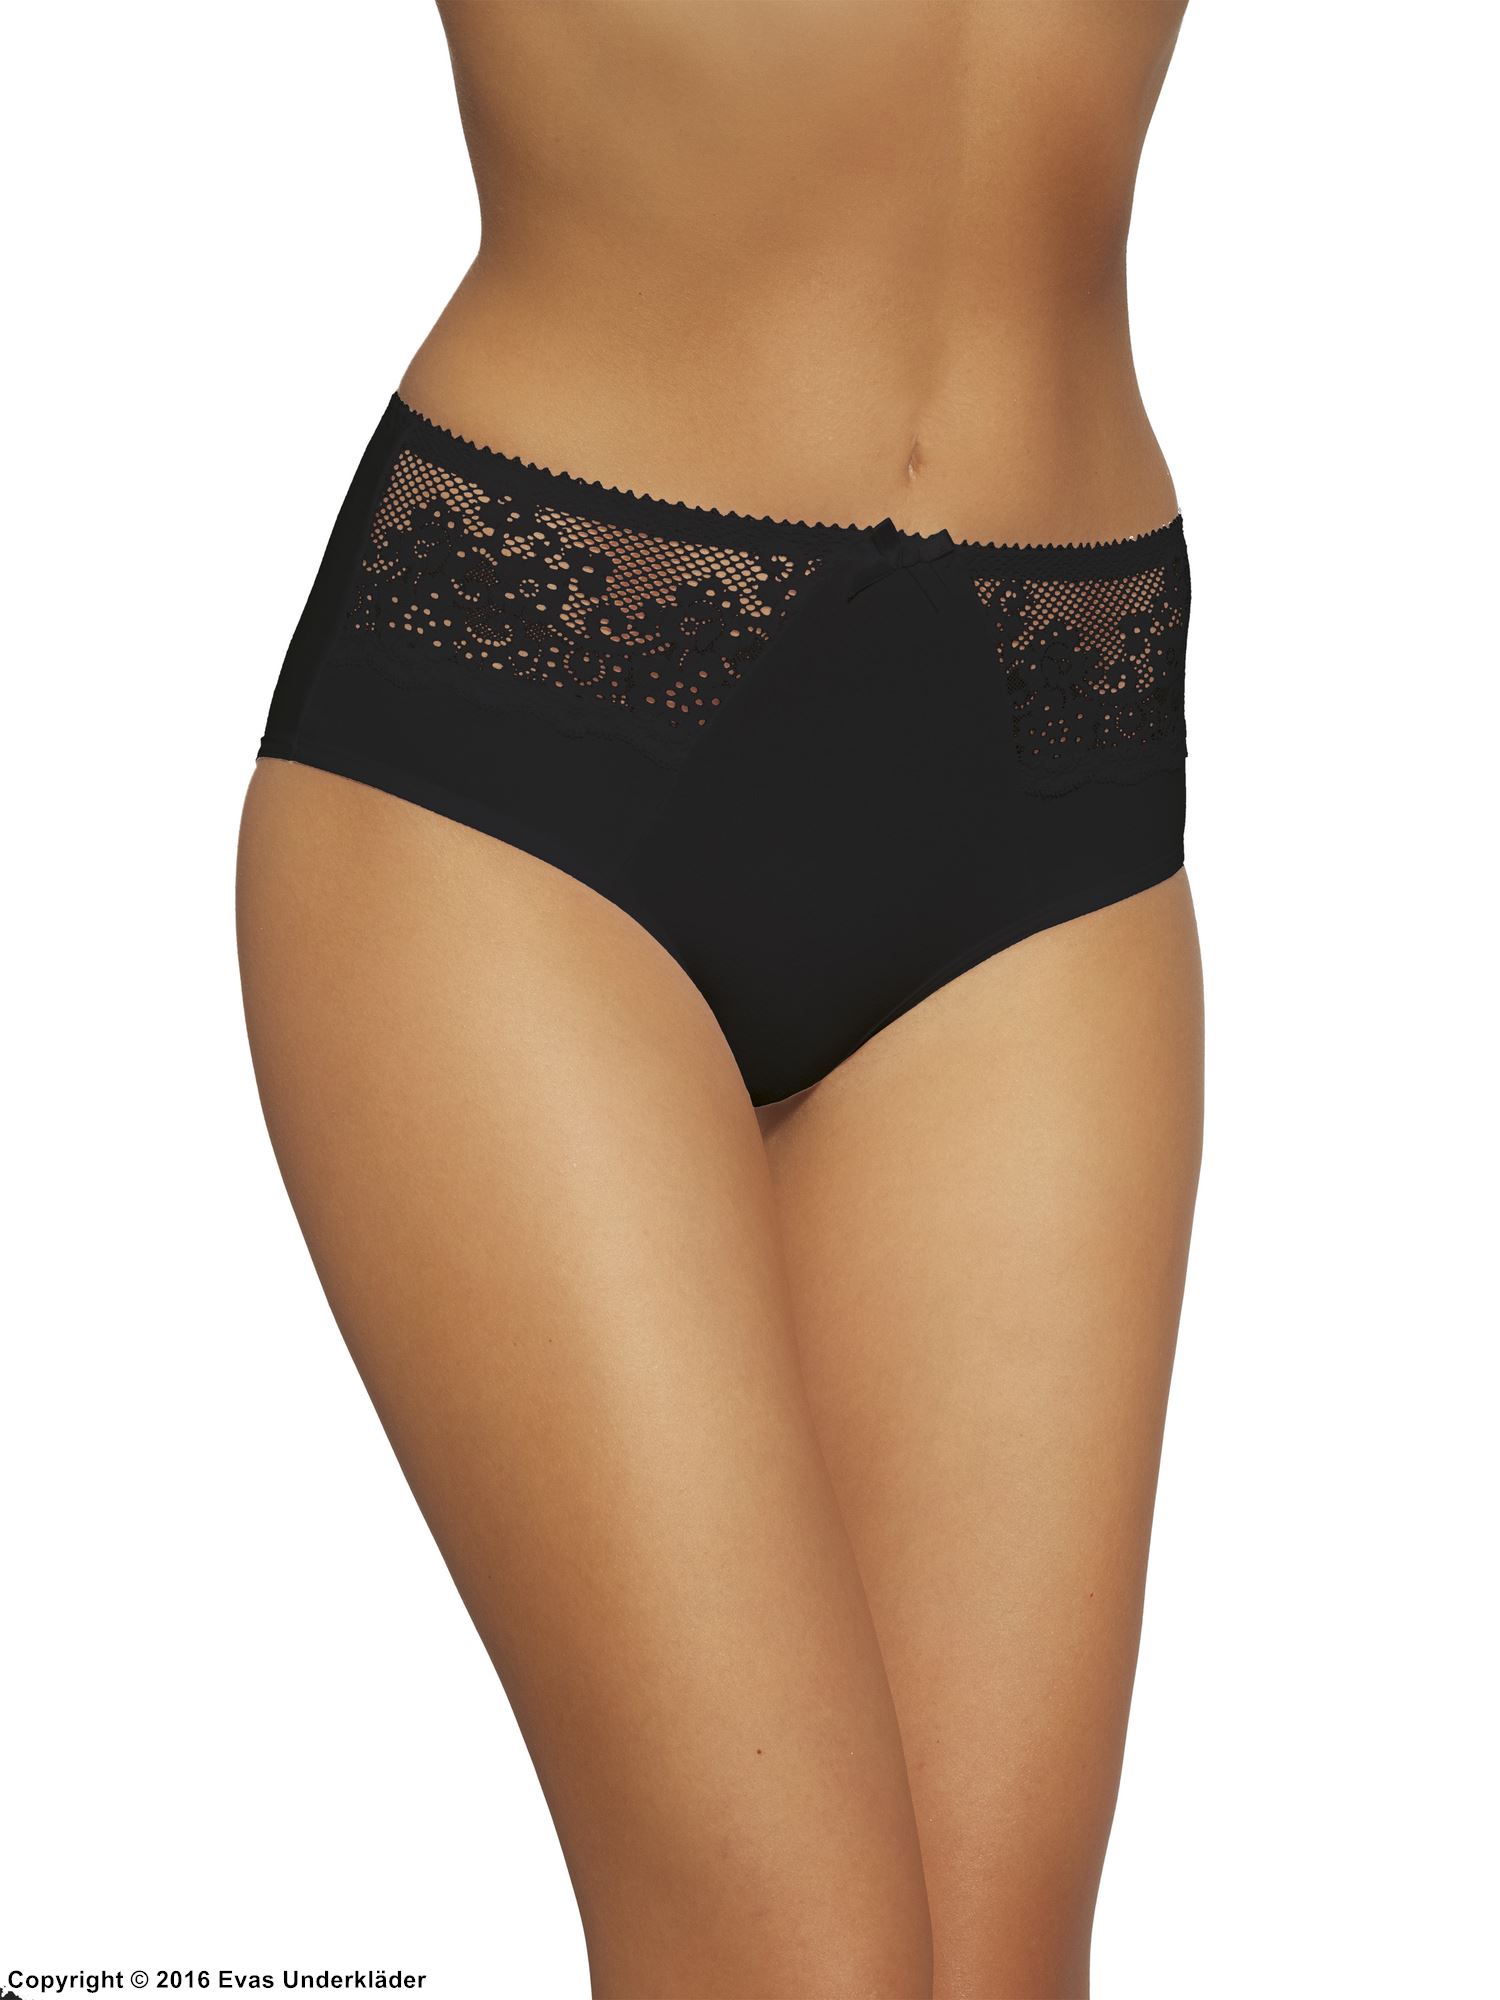 Classic briefs, lace inlays, slightly higher waist